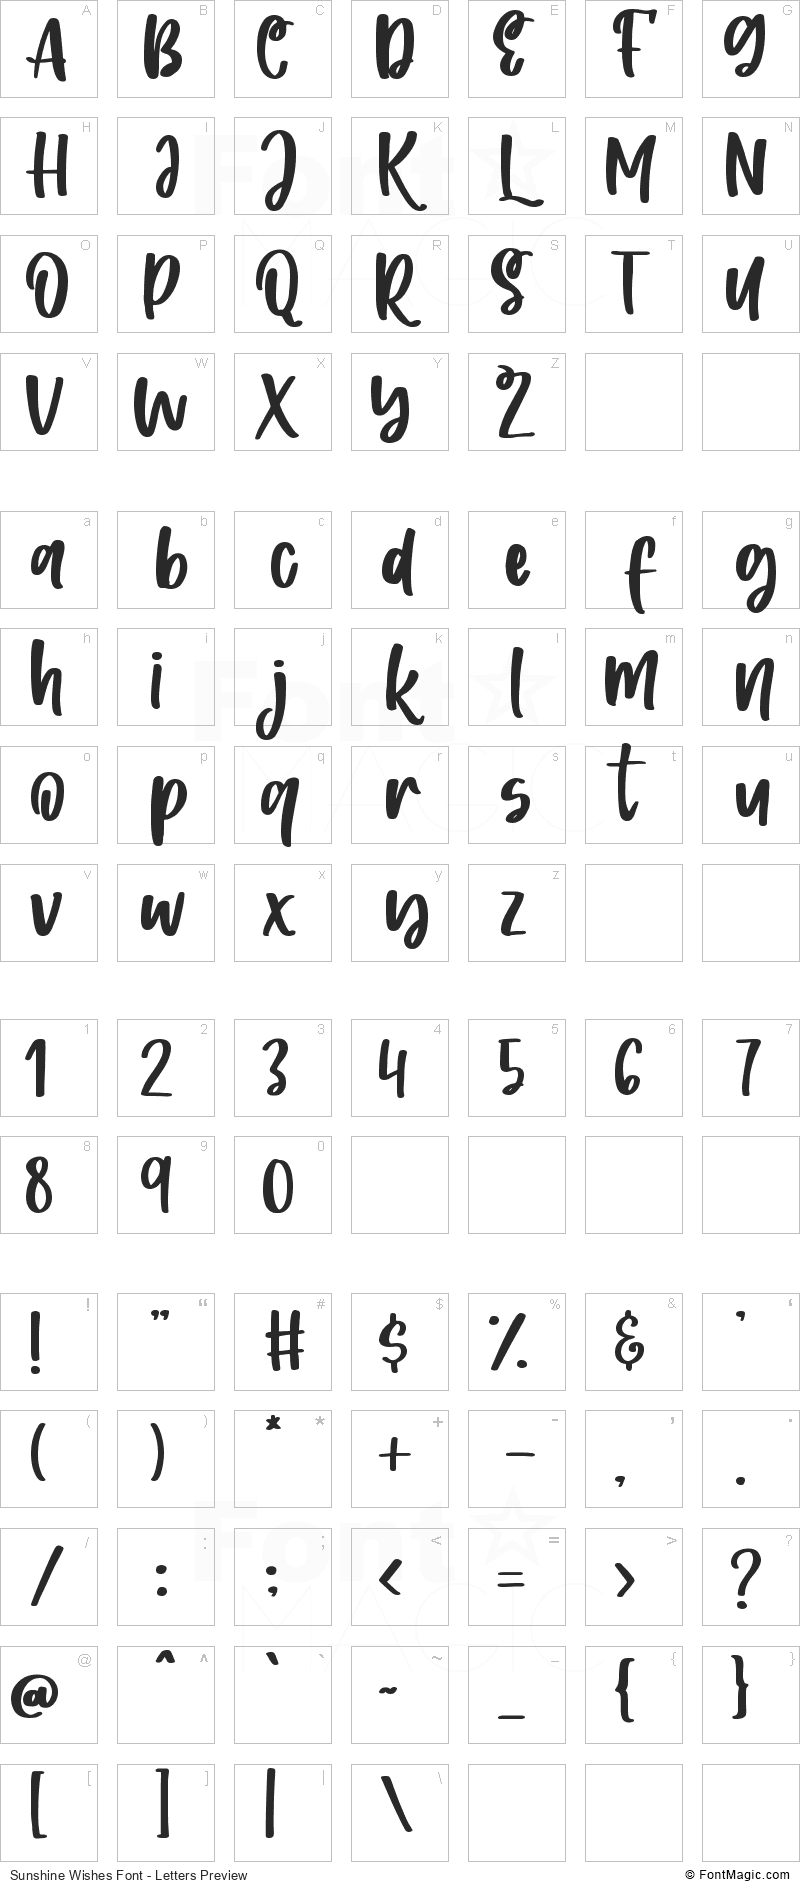 Sunshine Wishes Font - All Latters Preview Chart